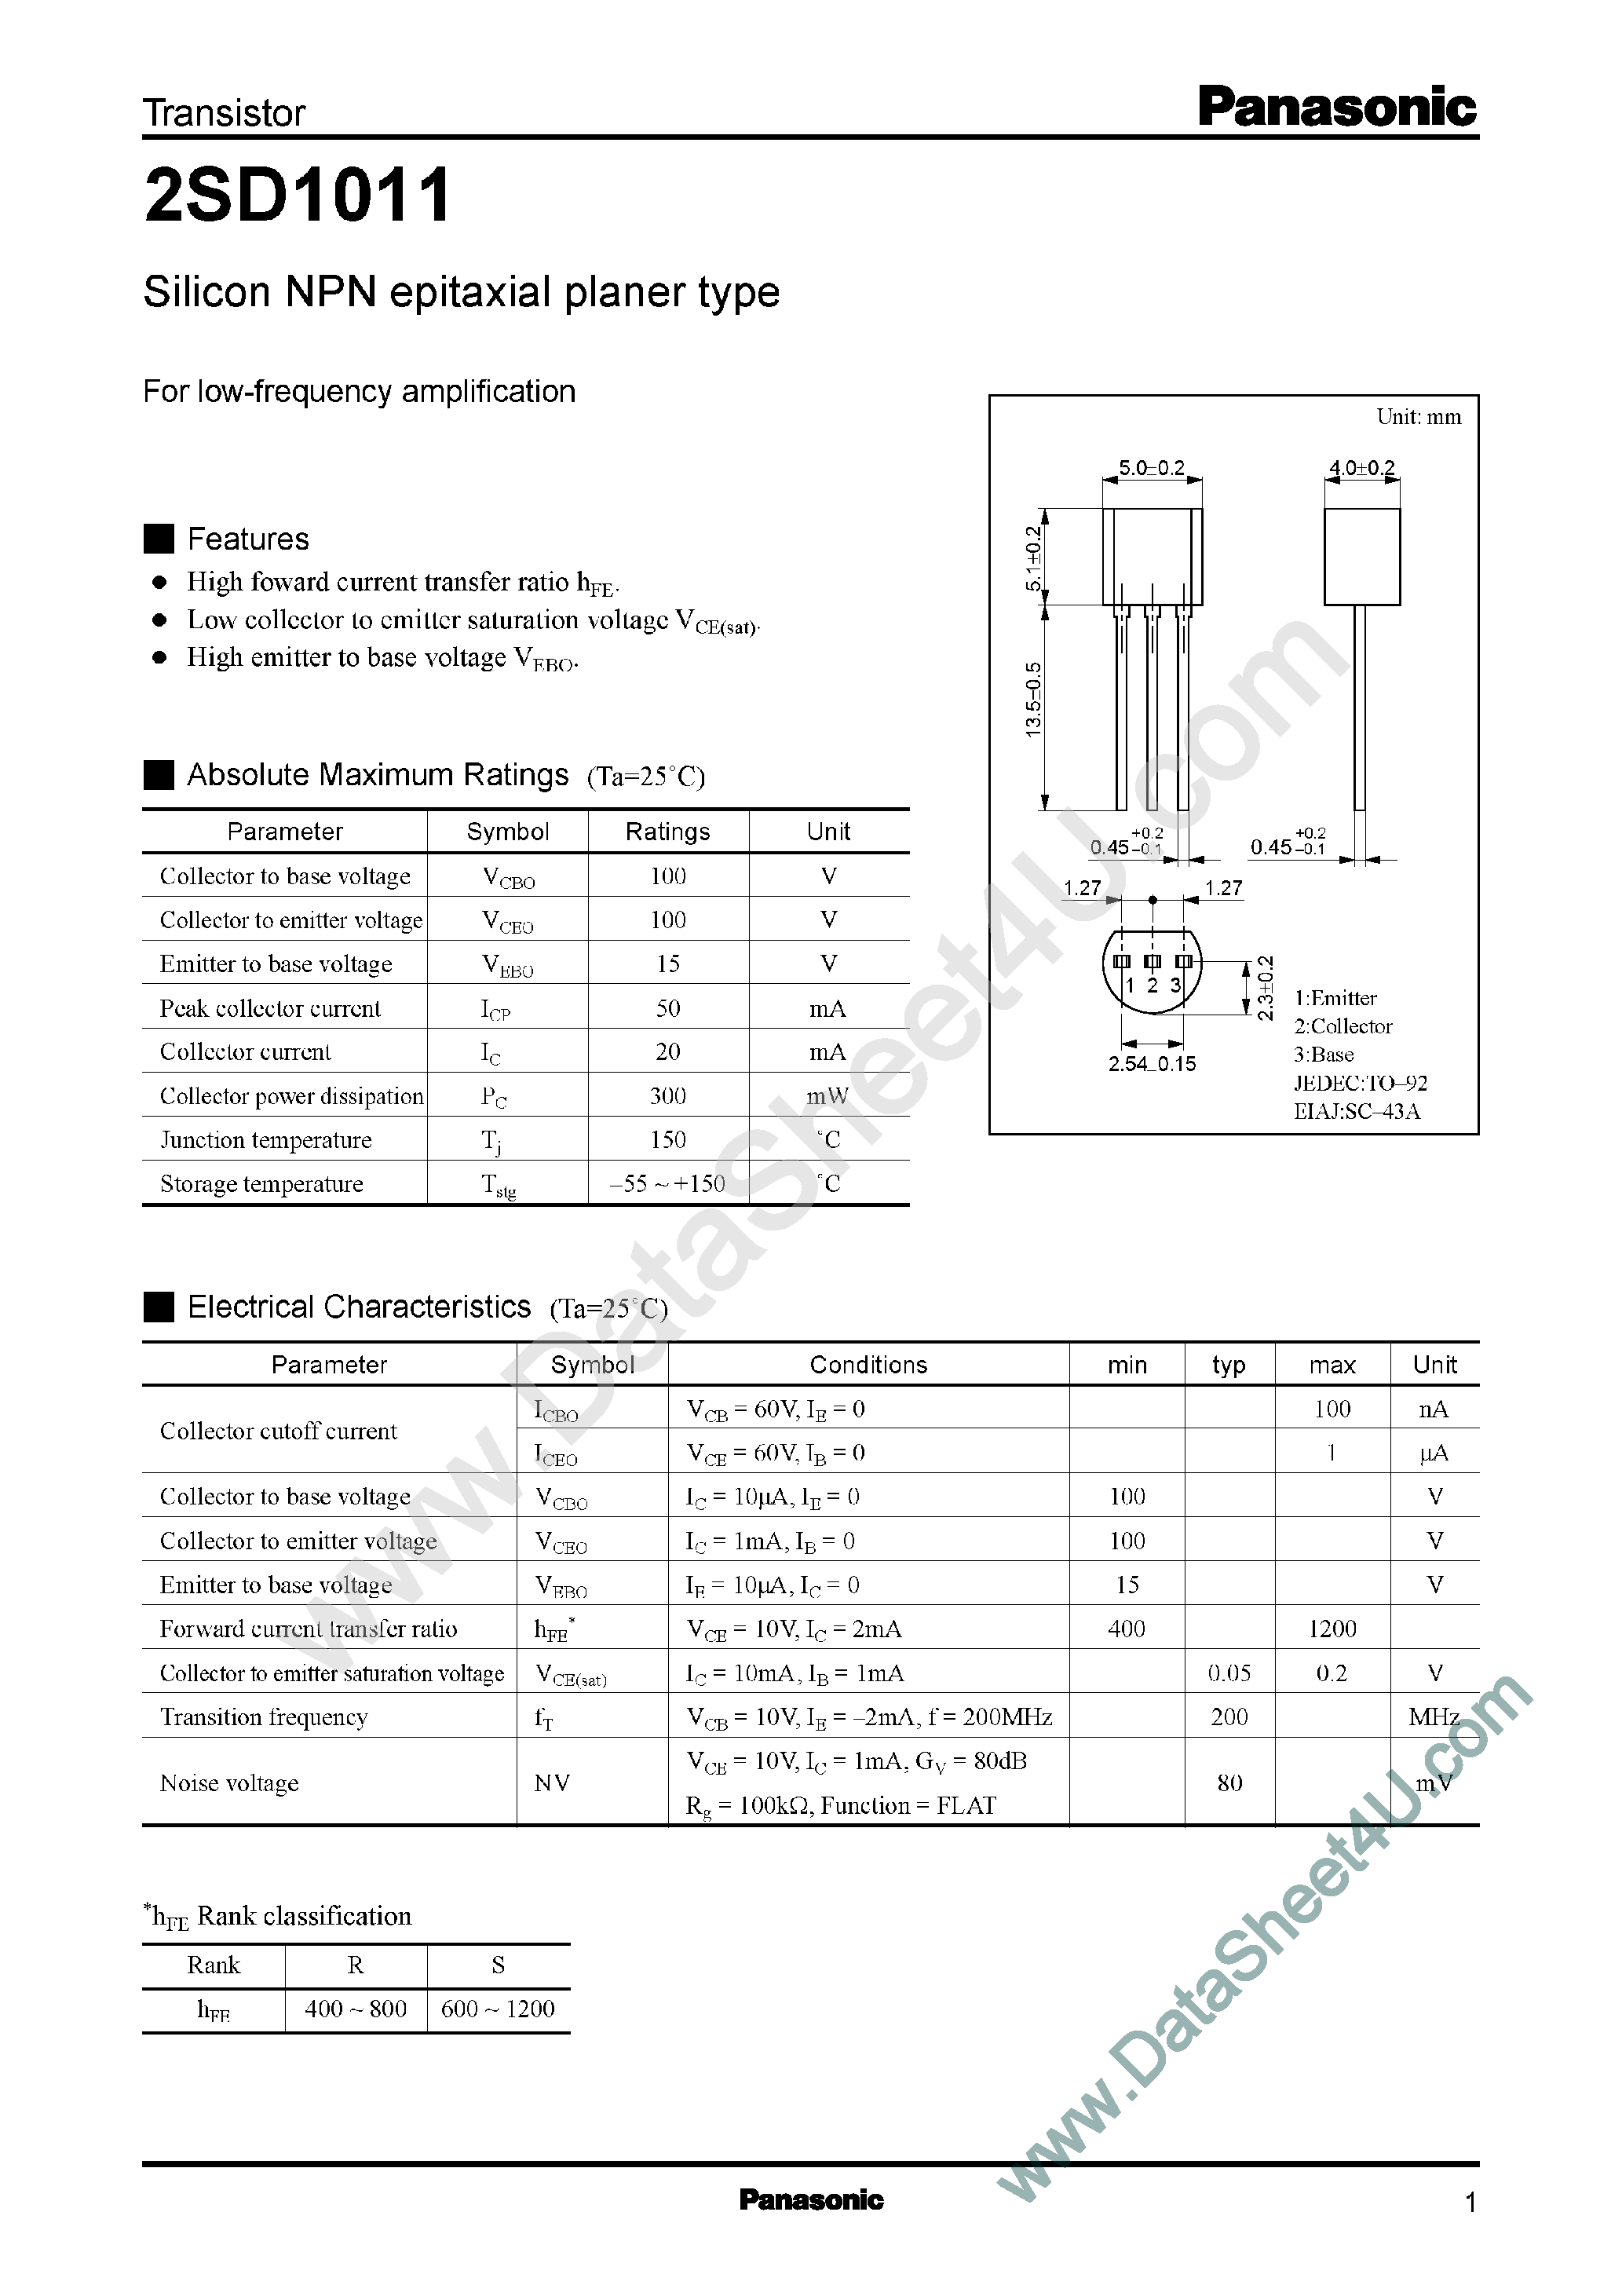 Datasheet 2SD1011 - Silicon NPN epitaxial planer type For low-frequency amplification page 1